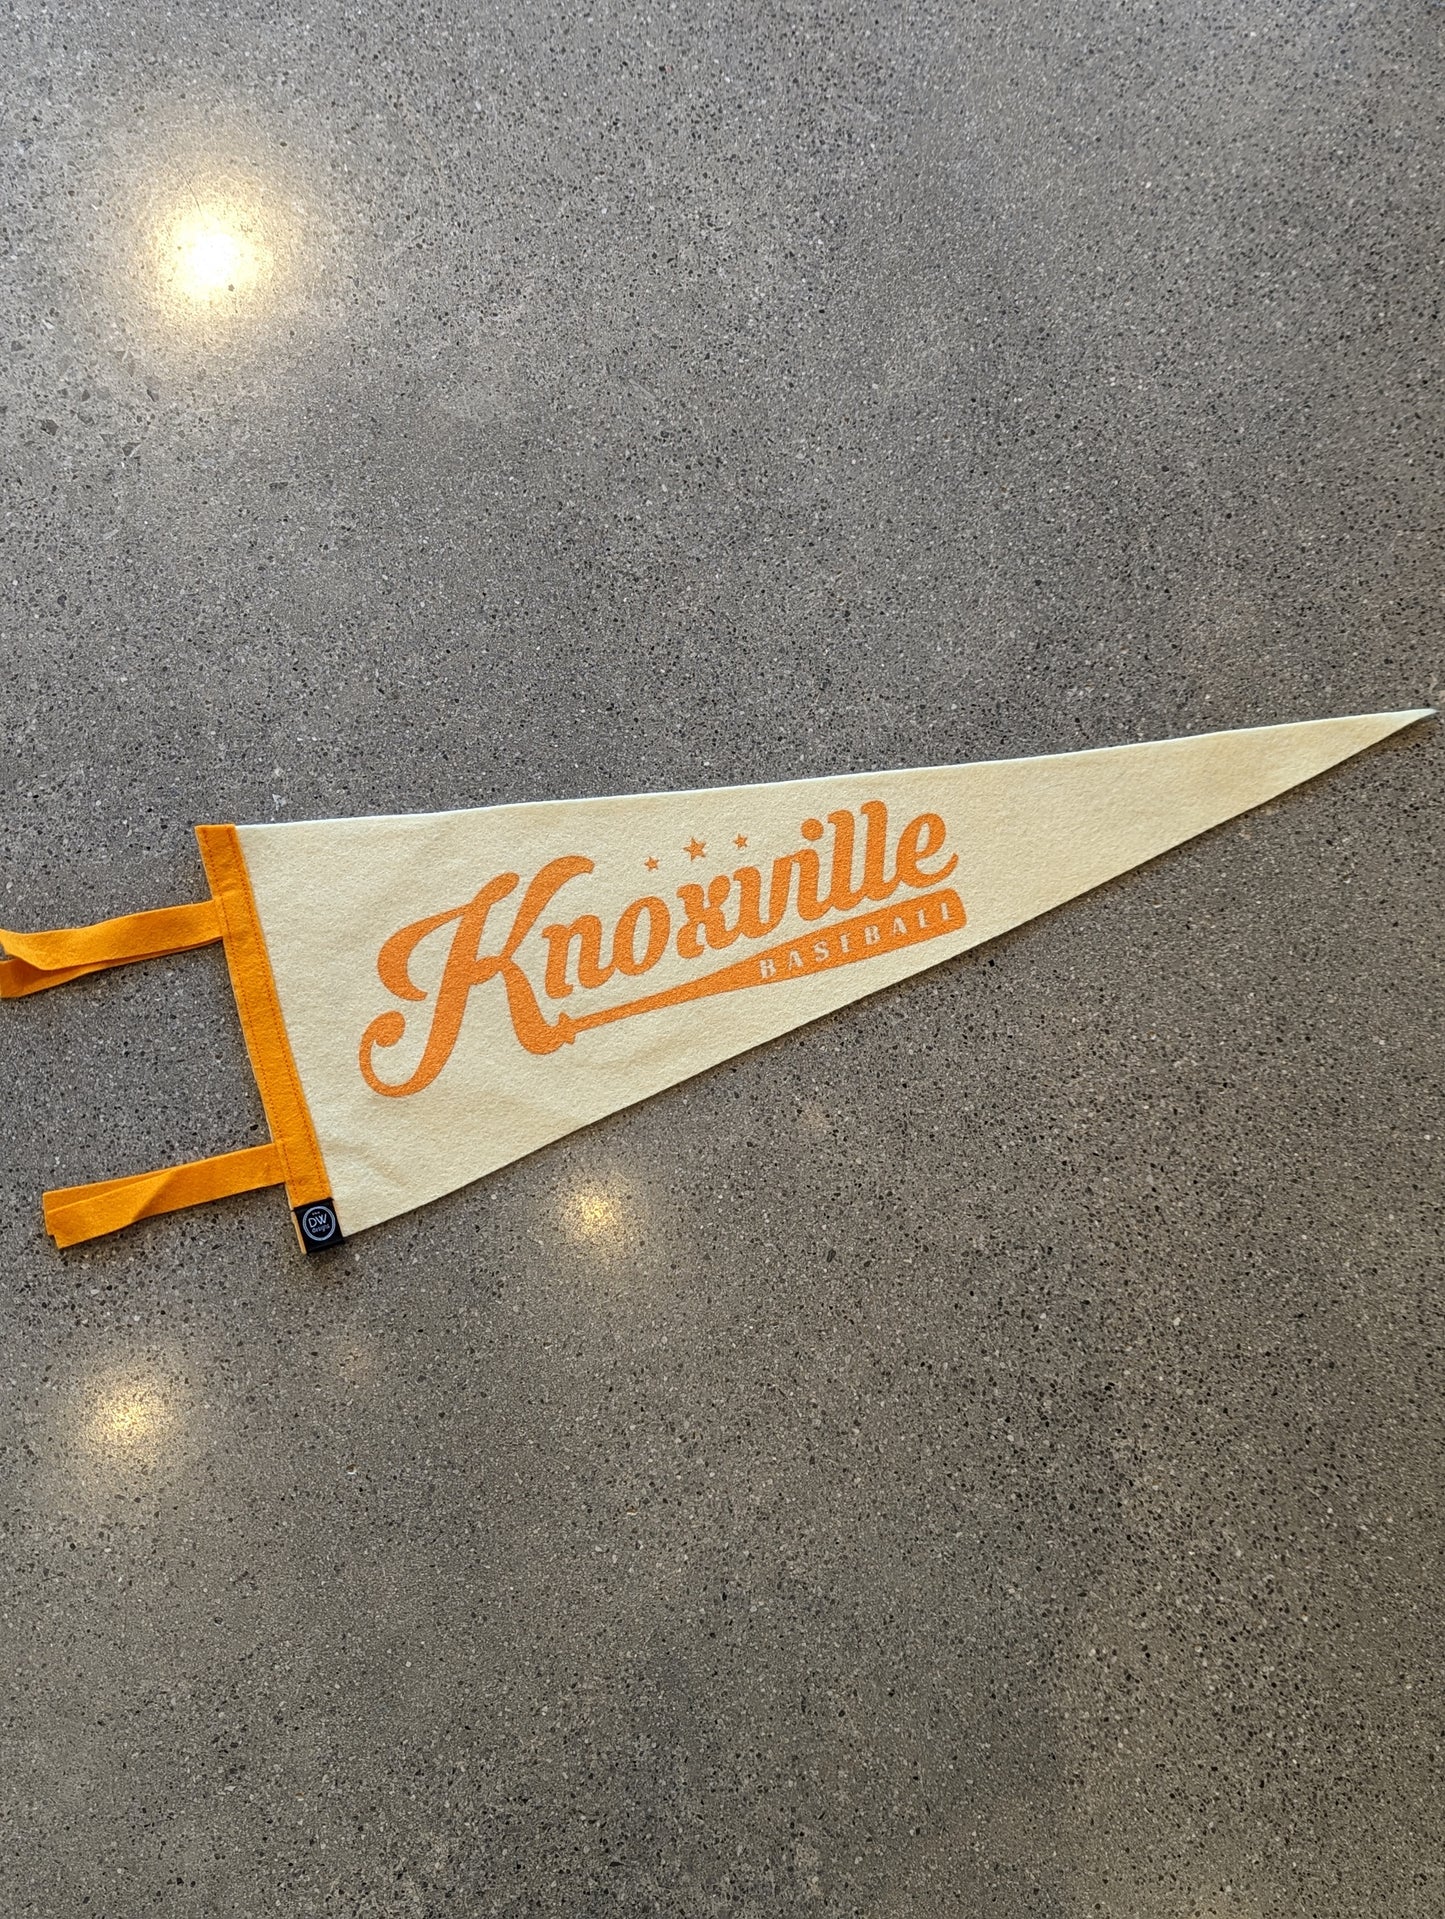 The Knoxville Baseball Pennant Flag